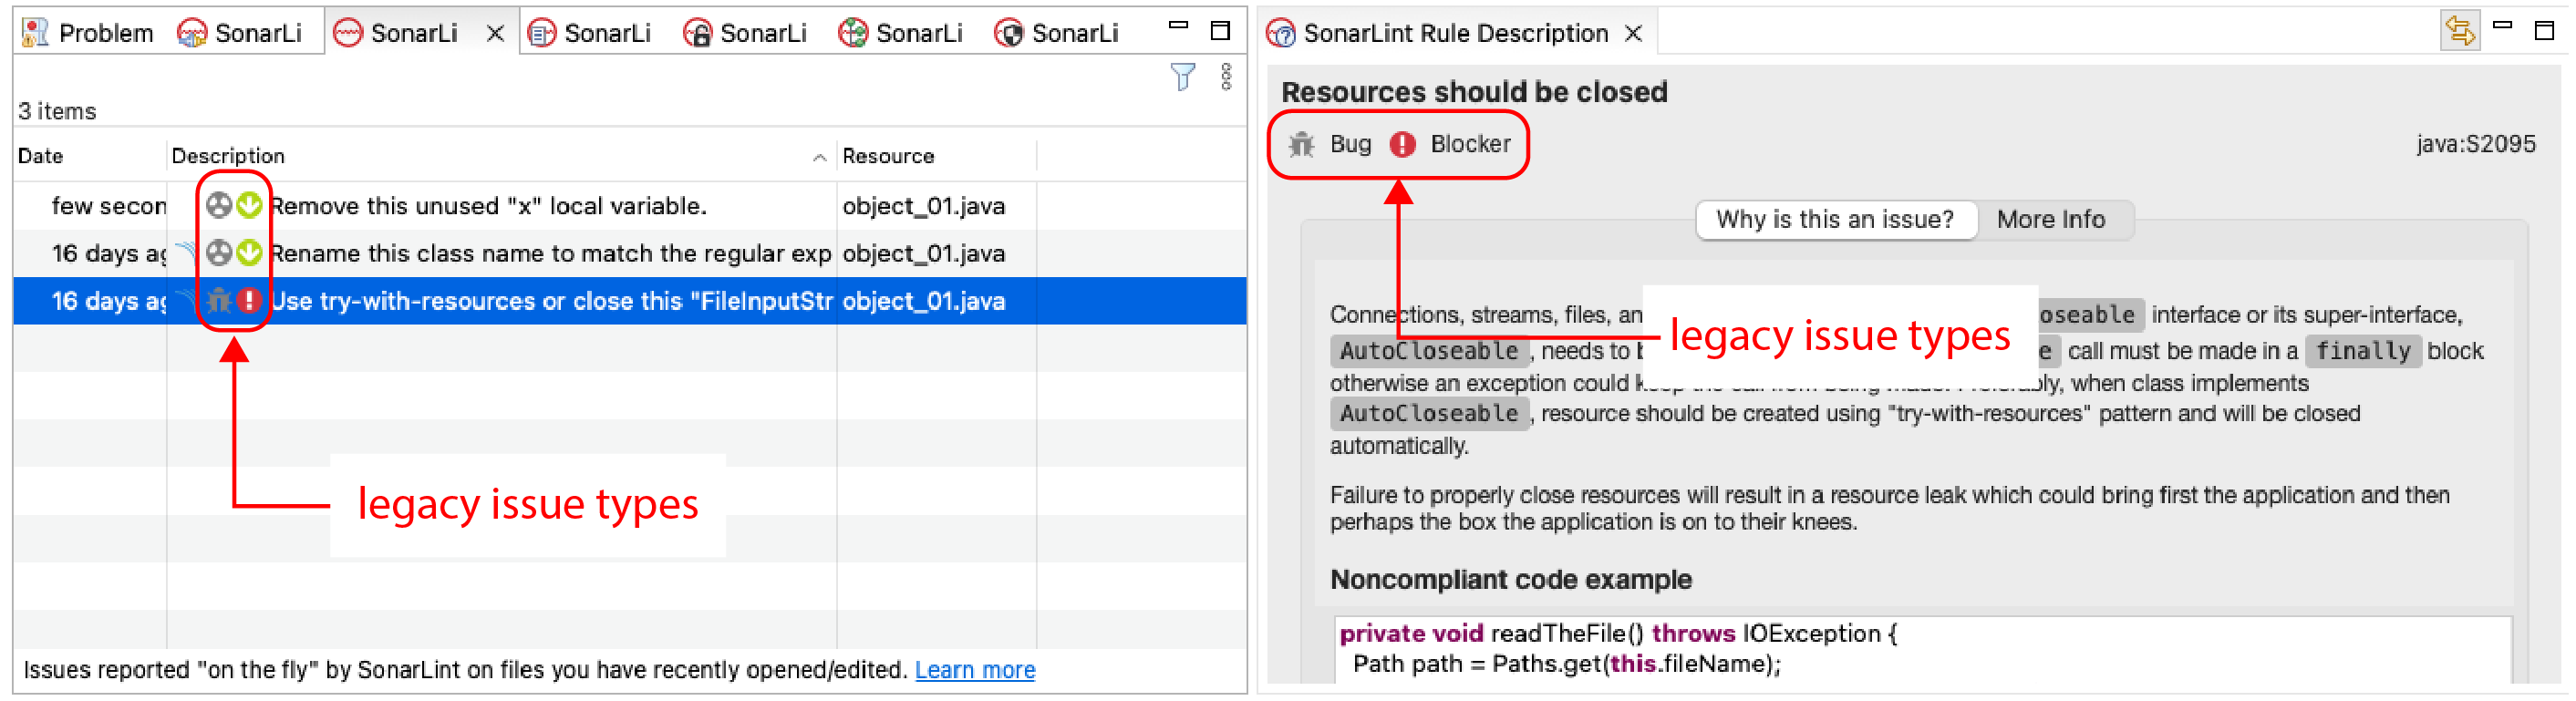 SonarLint for Eclipse 8.0 showing legacy issue types while in Connected Mode with SonarQube 10.1.